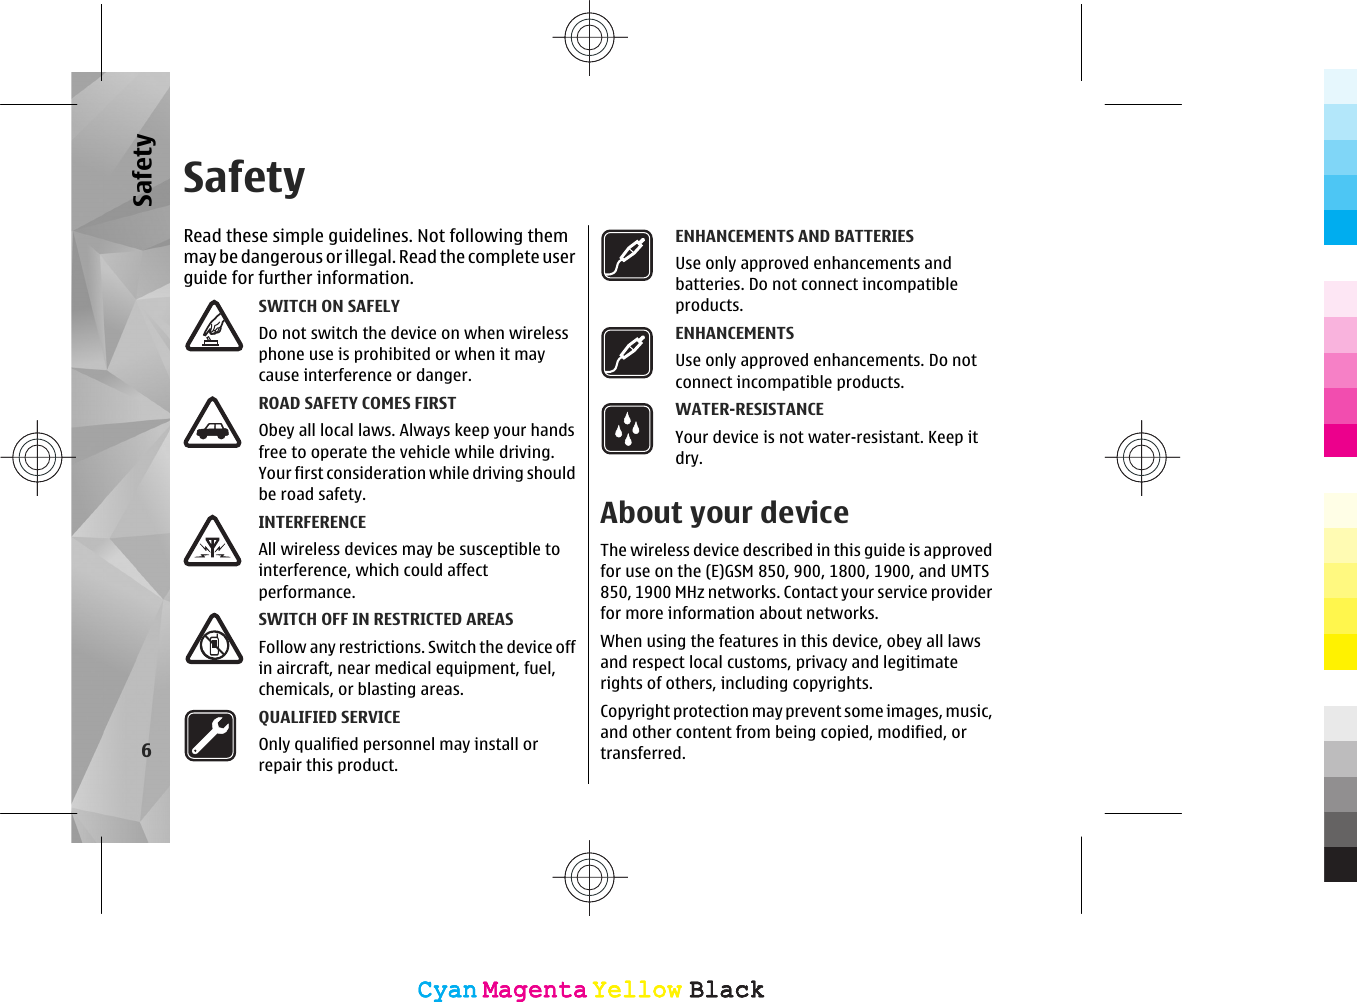 SafetyRead these simple guidelines. Not following themmay be dangerous or illegal. Read  the co mplete us erguide for further information.SWITCH ON SAFELYDo not switch the device on when wirelessphone use is prohibited or when it maycause interference or danger.ROAD SAFETY COMES FIRSTObey all local laws. Always keep your handsfree to operate the vehicle while driving.Your first consideration while driving shouldbe road safety.INTERFERENCEAll wireless devices may be susceptible tointerference, which could affectperformance.SWITCH OFF IN RESTRICTED AREASFollow any restrictions. Switch the device offin aircraft, near medical equipment, fuel,chemicals, or blasting areas.QUALIFIED SERVICEOnly qualified personnel may install orrepair this product.ENHANCEMENTS AND BATTERIESUse only approved enhancements andbatteries. Do not connect incompatibleproducts.ENHANCEMENTSUse only approved enhancements. Do notconnect incompatible products.WATER-RESISTANCEYour device is not water-resistant. Keep itdry.About your deviceThe wireless device described in this guide is approvedfor use on the (E)GSM 850, 900, 1800, 1900, and UMTS850, 1900 MHz networks. Contact your service providerfor more information about networks.When using the features in this device, obey all lawsand respect local customs, privacy and legitimaterights of others, including copyrights.Copyright protection may prevent some images, music,and other content from being copied, modified, ortransferred.6SafetyCyanCyanMagentaMagentaYellowYellowBlackBlackCyanCyanMagentaMagentaYellowYellowBlackBlack